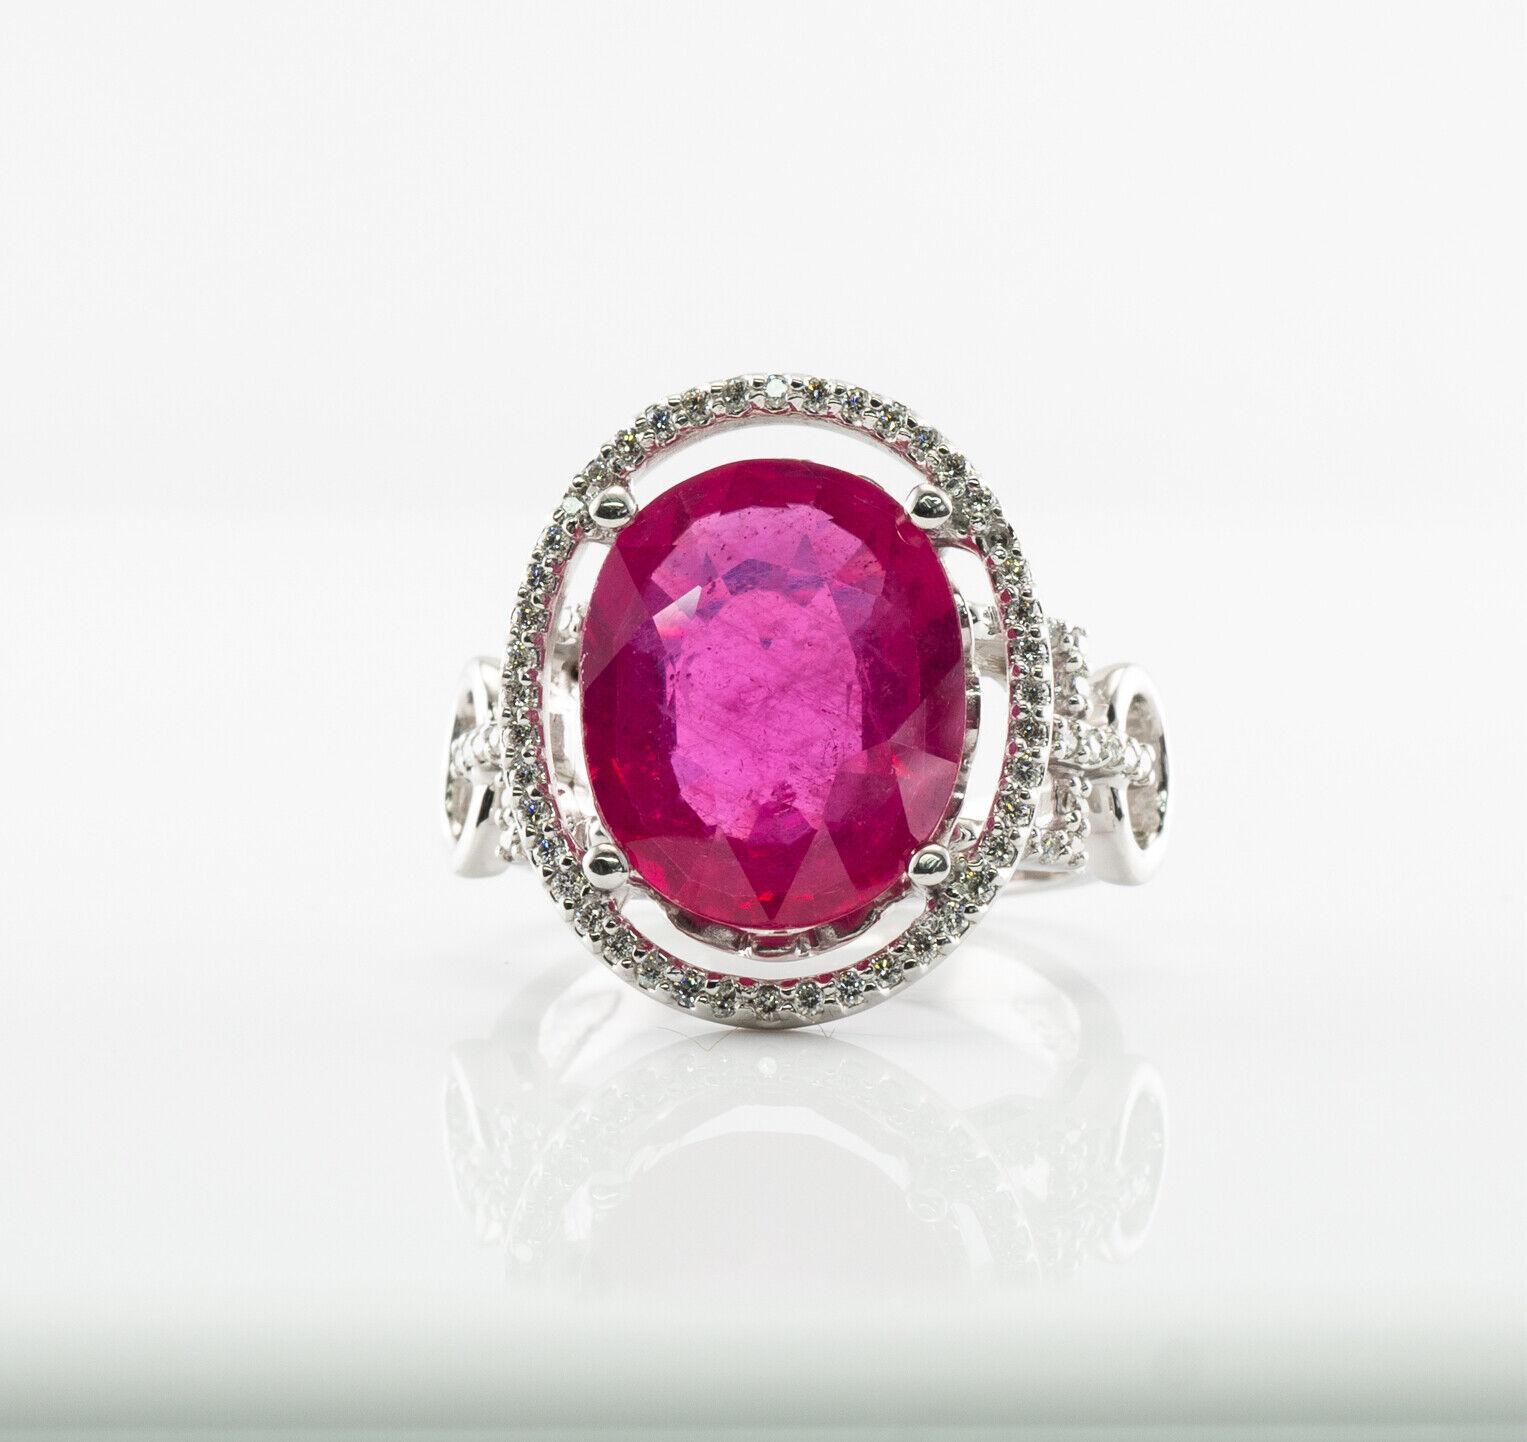 Pink Ruby Diamond Ring 14K White Gold

This gorgeous estate ring is finely crafted in solid 14K White gold and set with natural Earth mined Pink Ruby and diamonds. The center oval cut gem measures 14mm x 11mm (6.16 carats). This is a very good